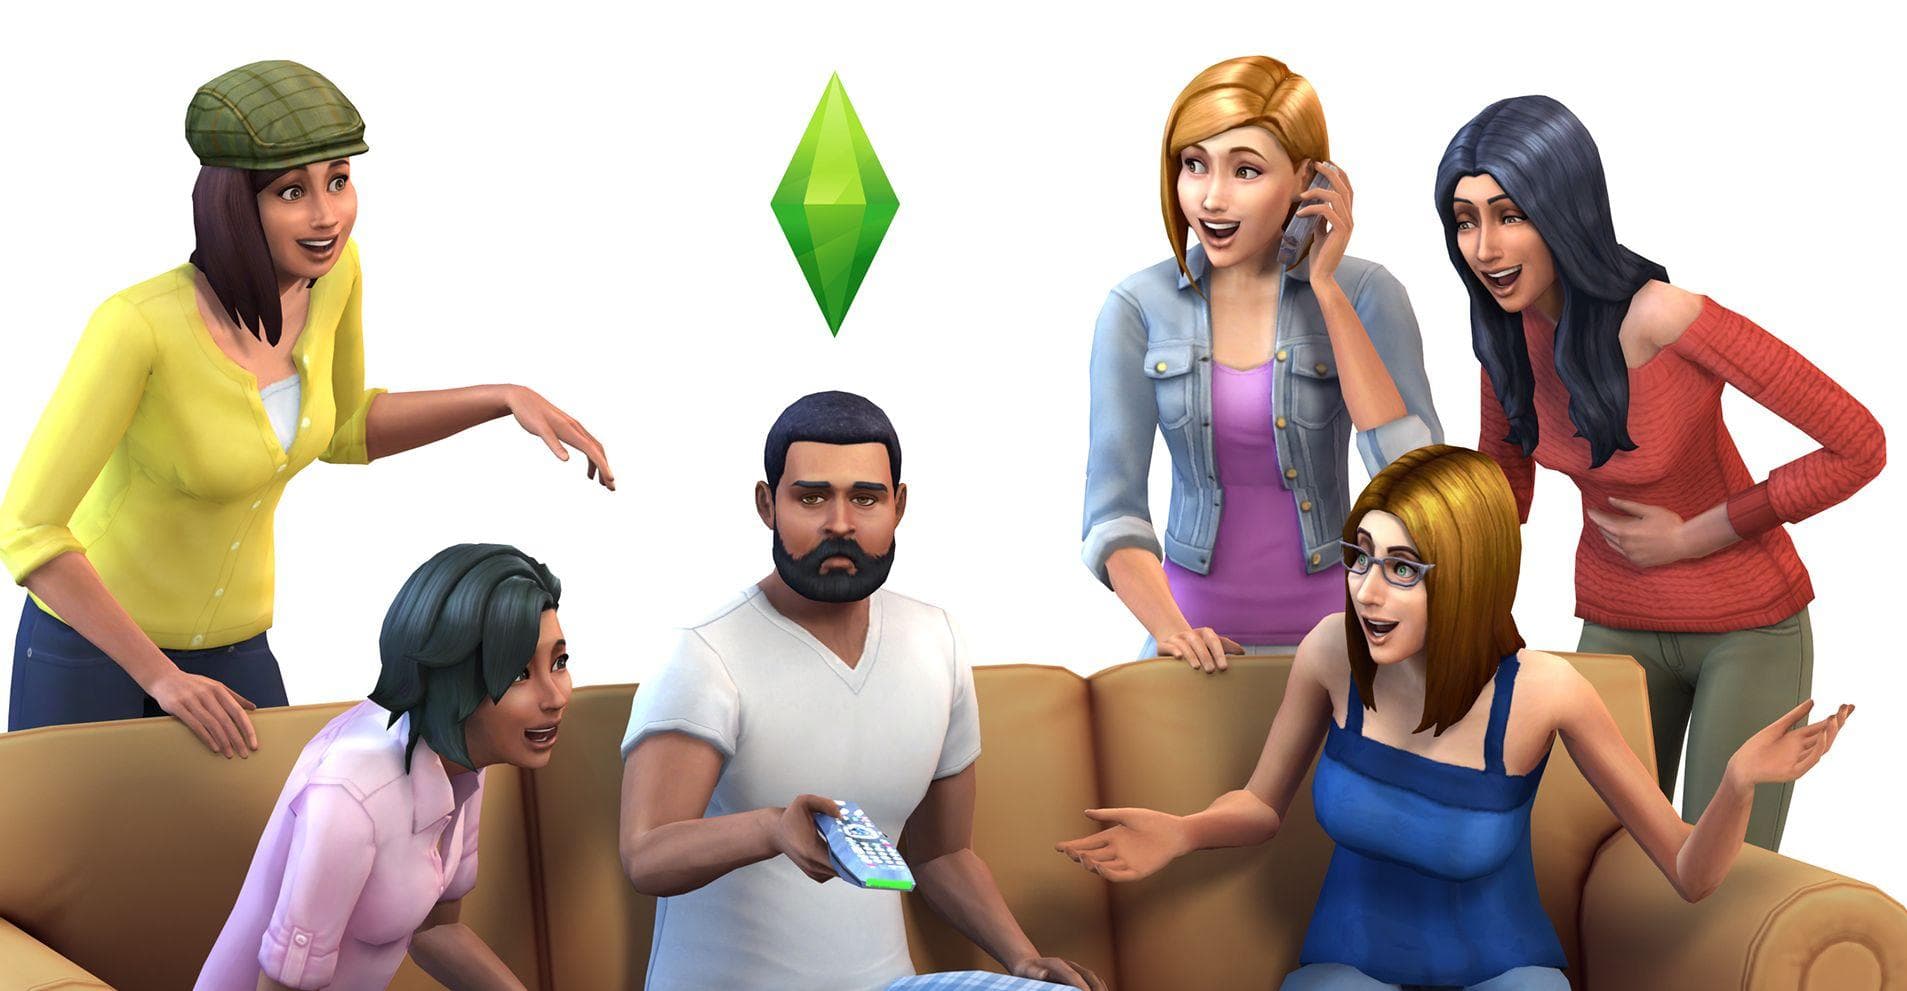 Here Are The Wildest Stories About 'The Sims' From The Players